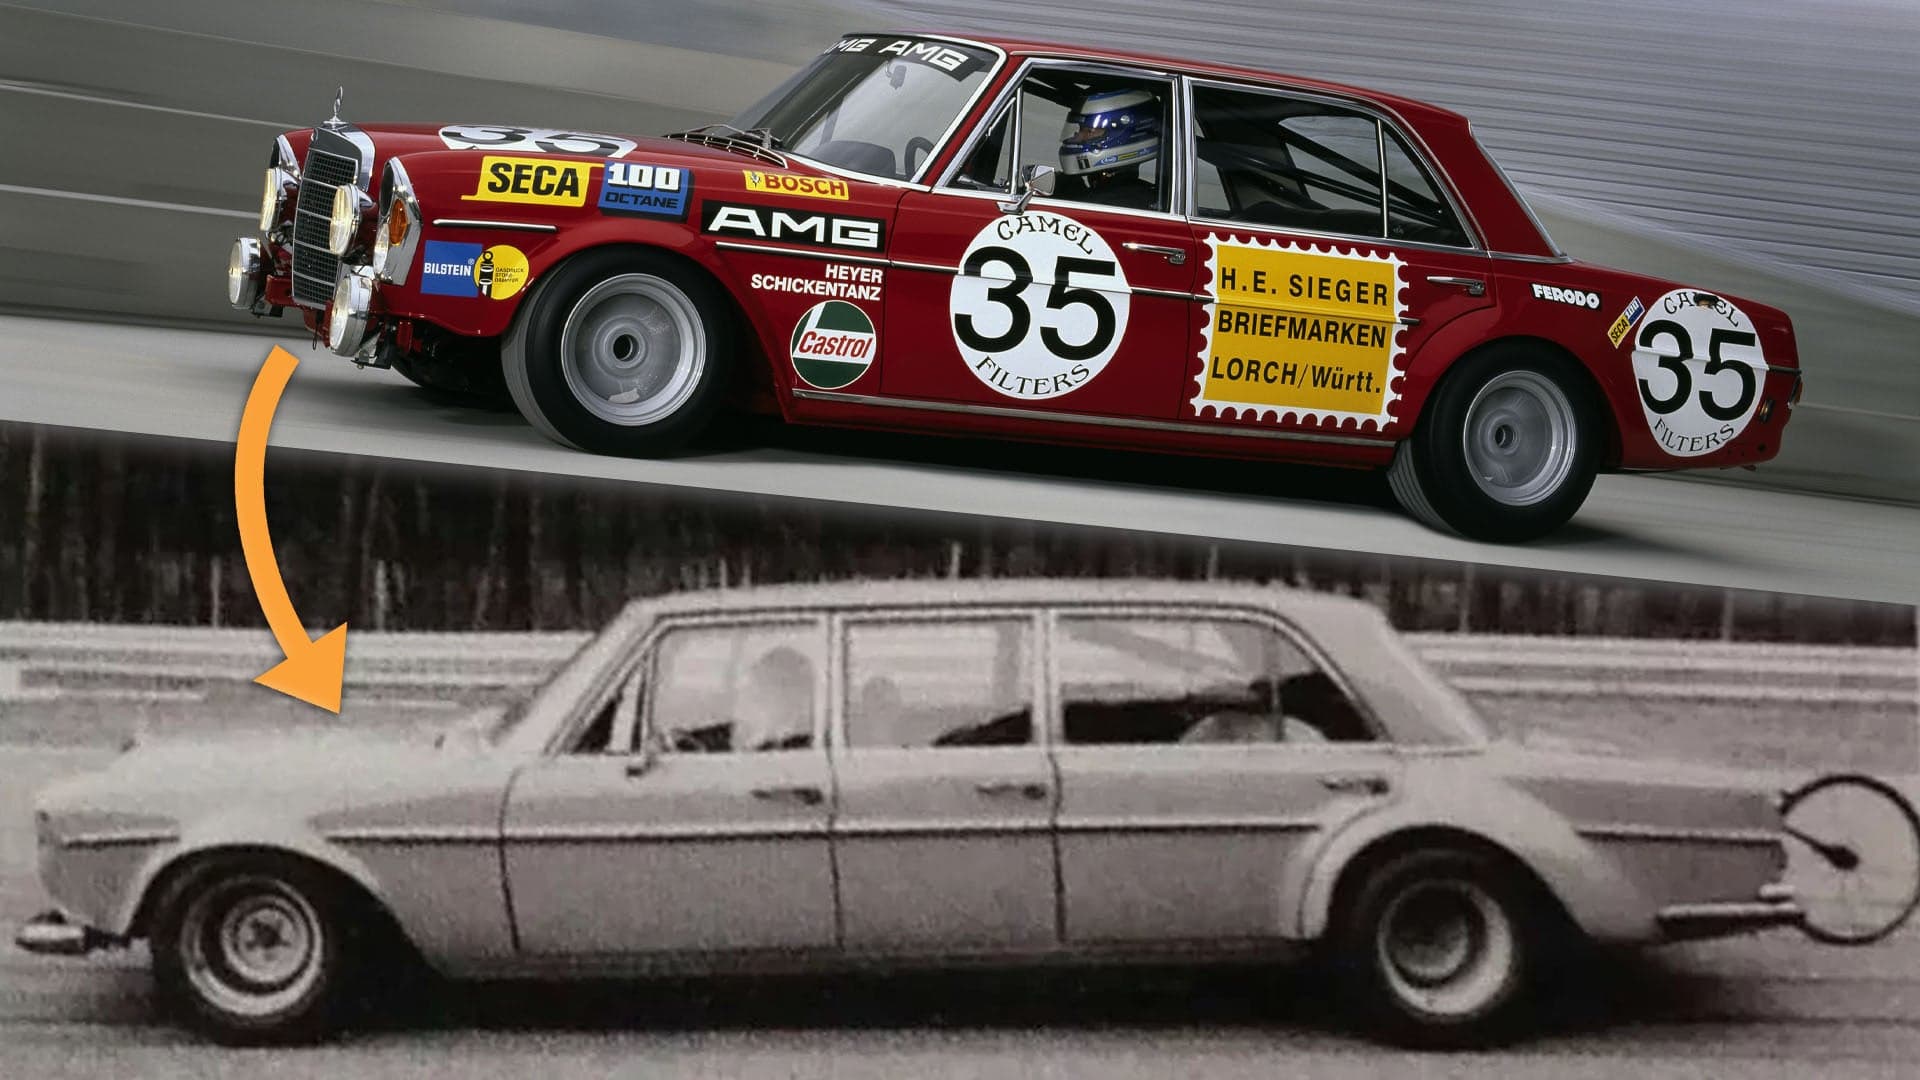 The Red Pig: How the Original AMG Ended Up Testing Fighter Jet Parts Before Vanishing